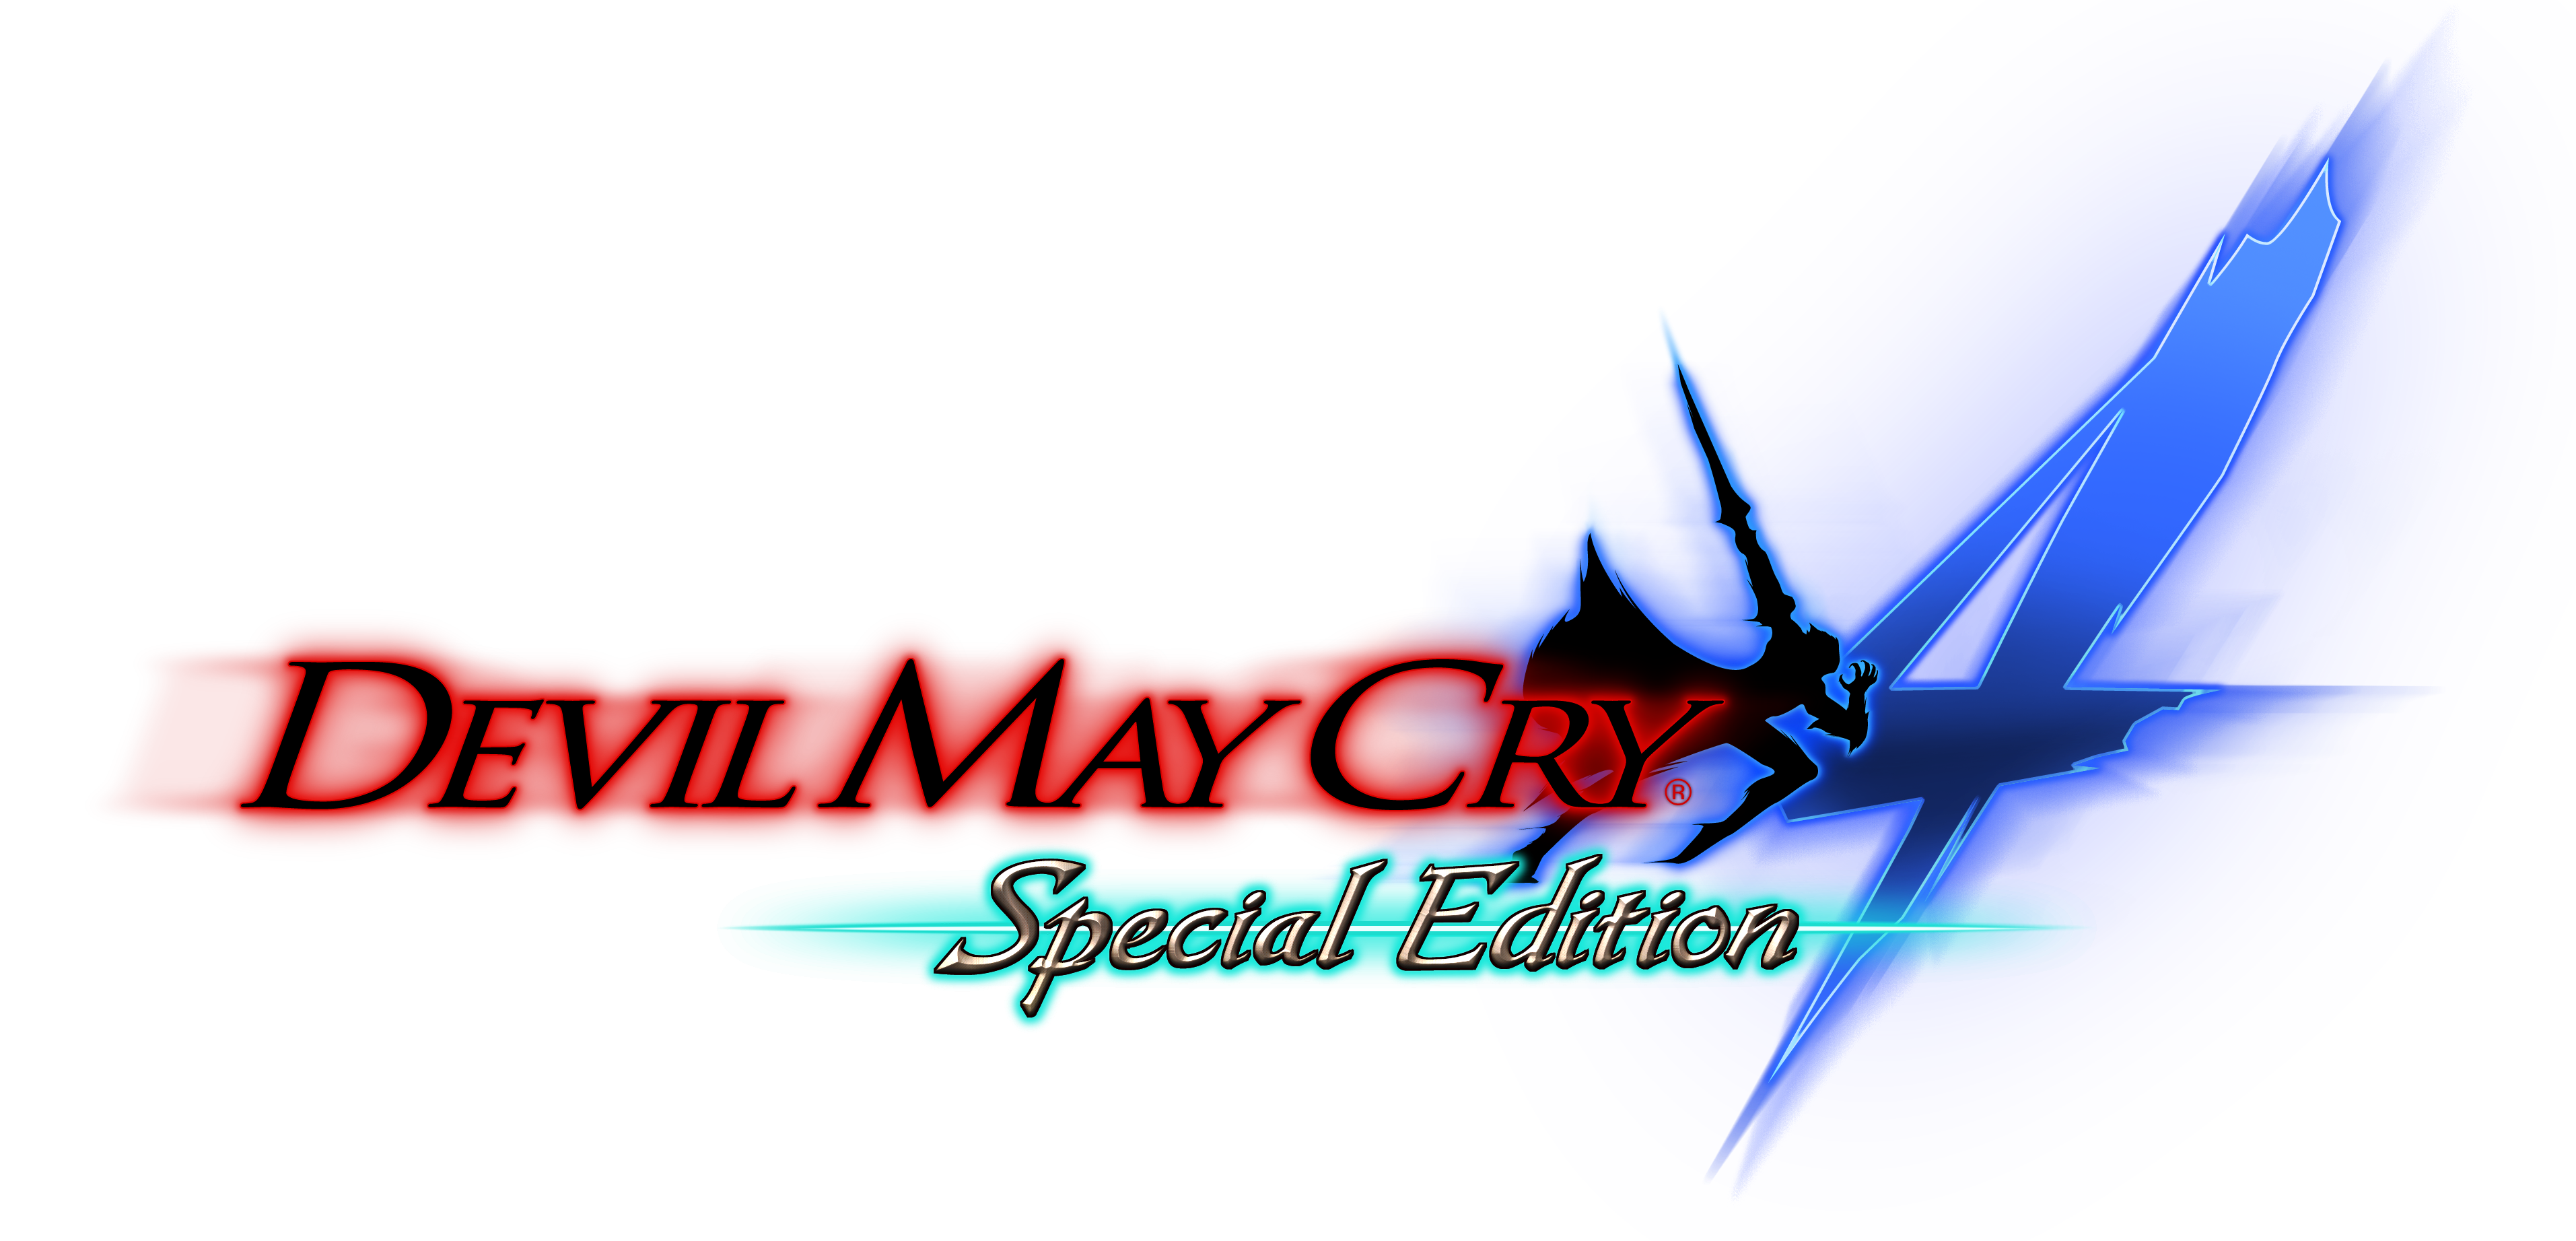 Devil May Cry 4: Special Edition. ДМС 4 Special Edition. DMC 4 logo. Devil May Cry 4 Special Edition логотип.